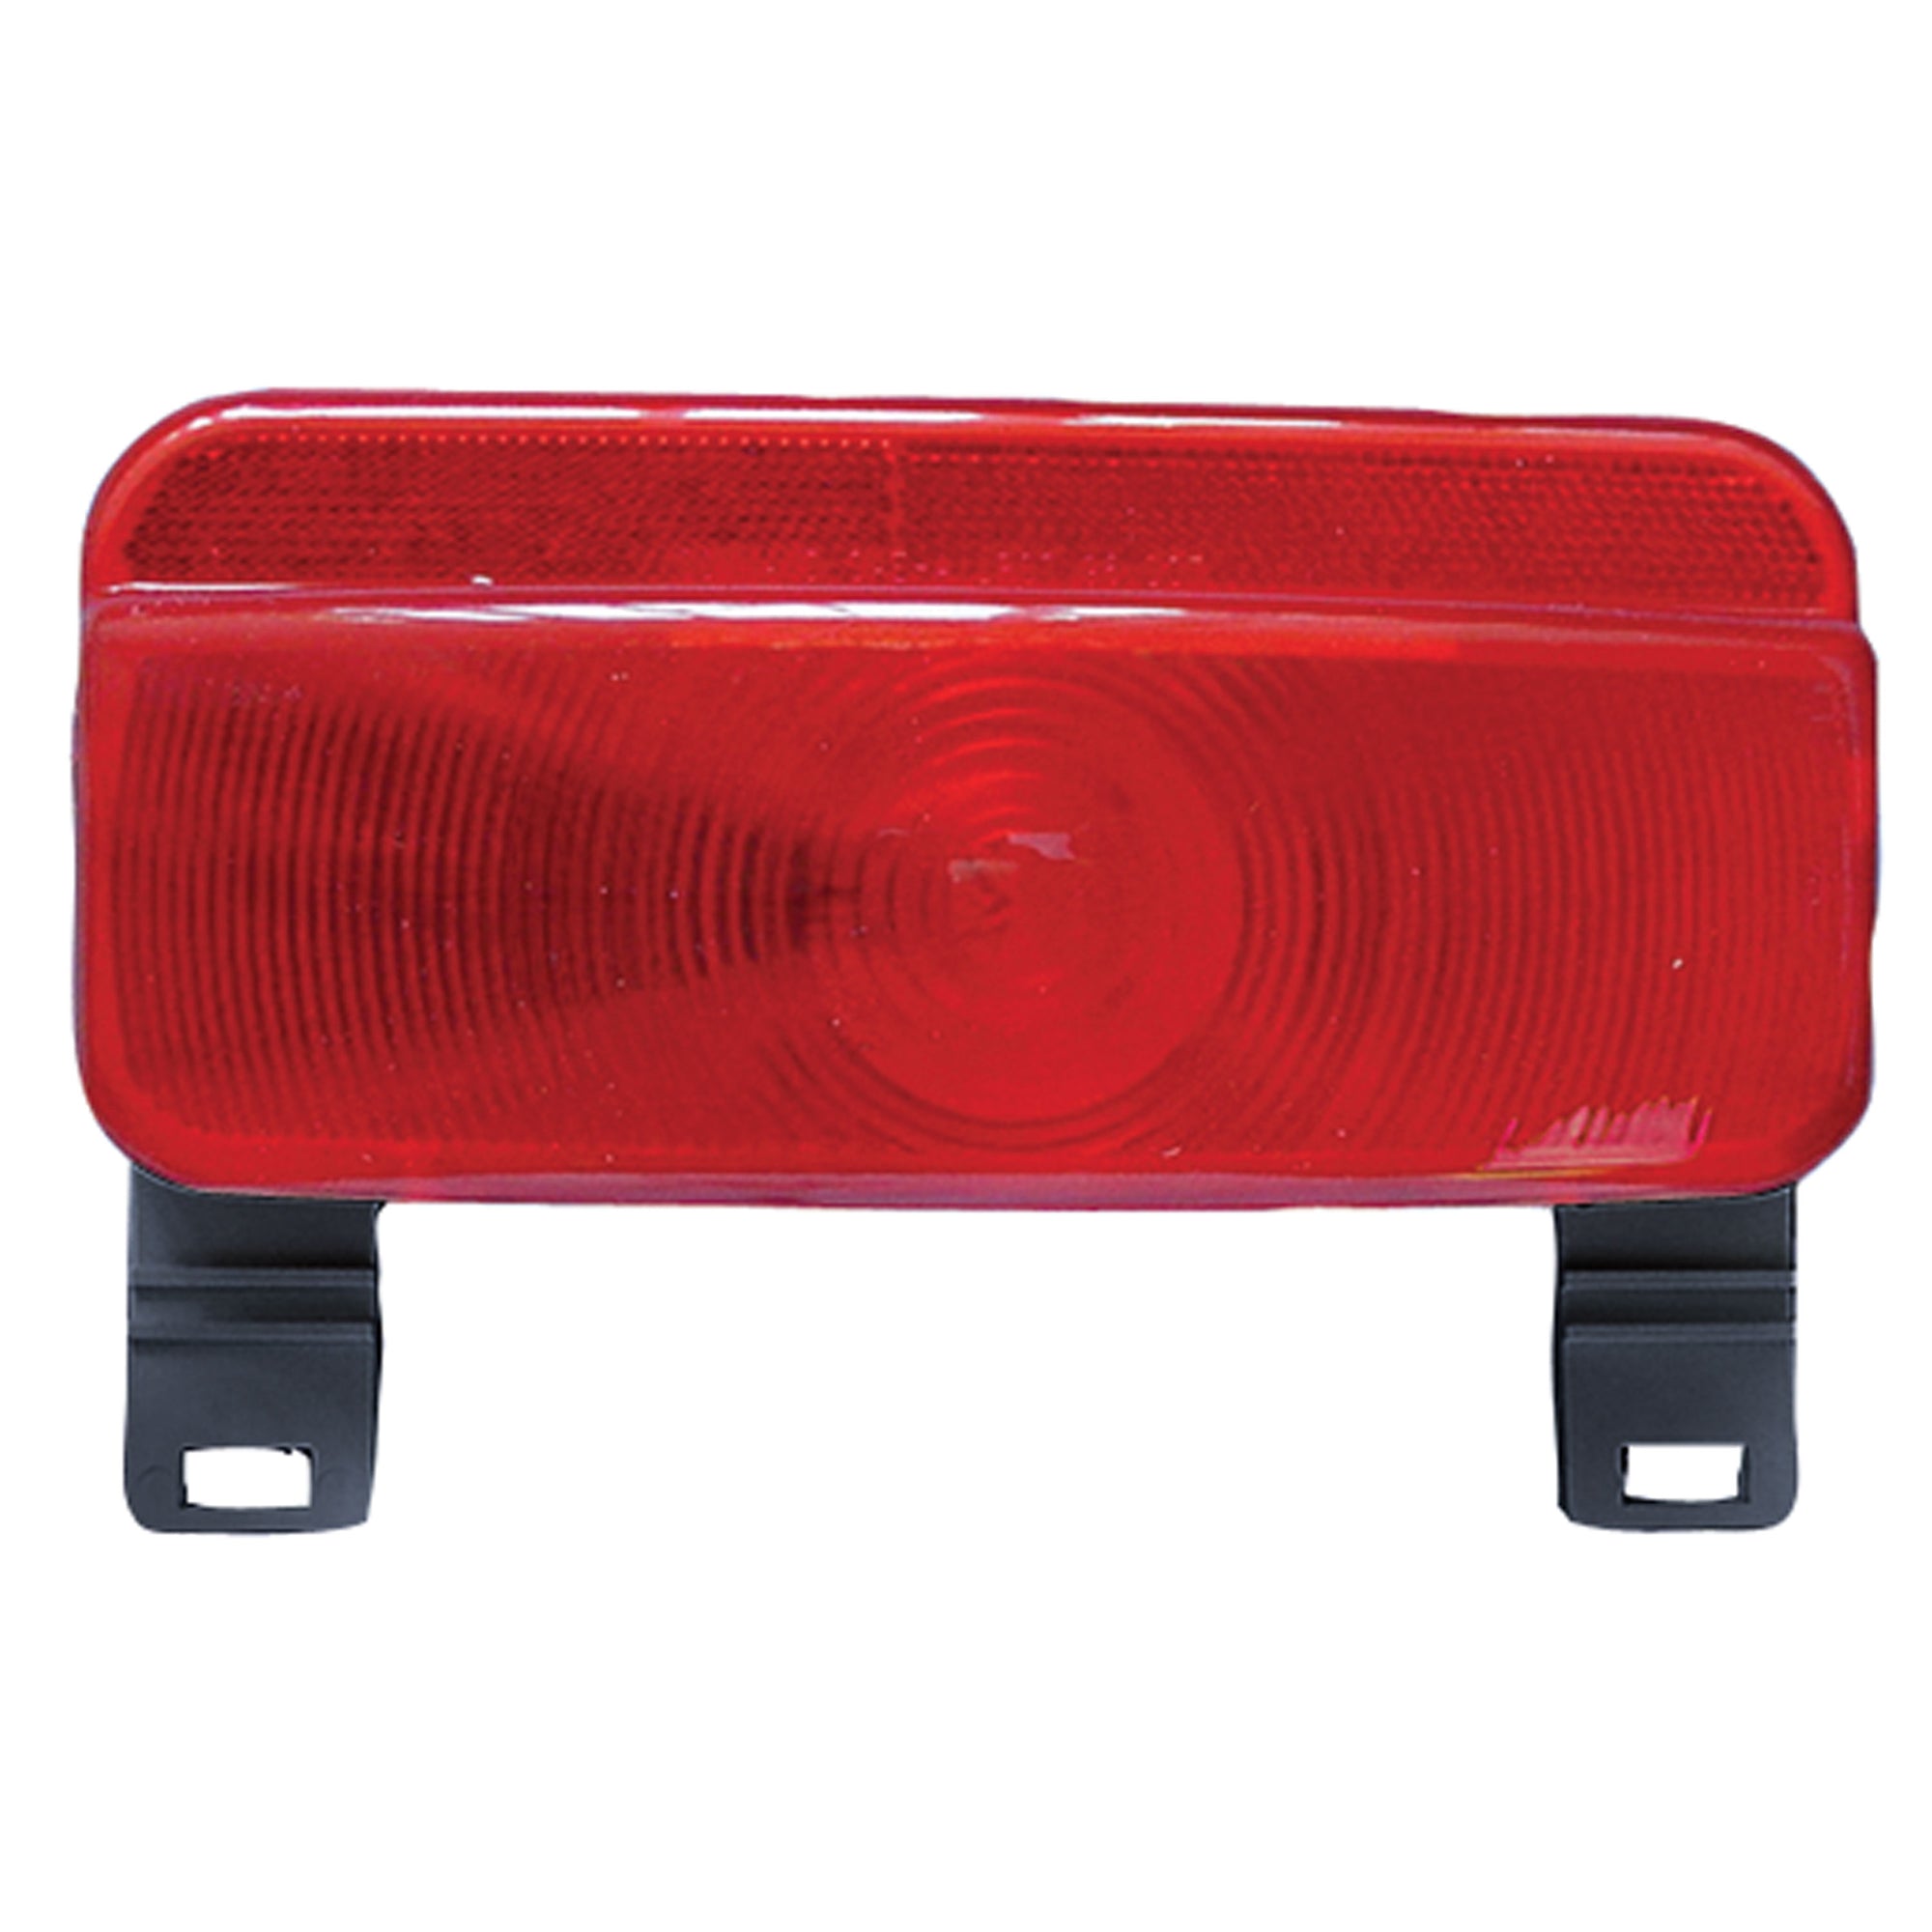 Fasteners Unlimited 003-81LB Taillight W/License Brkt Red